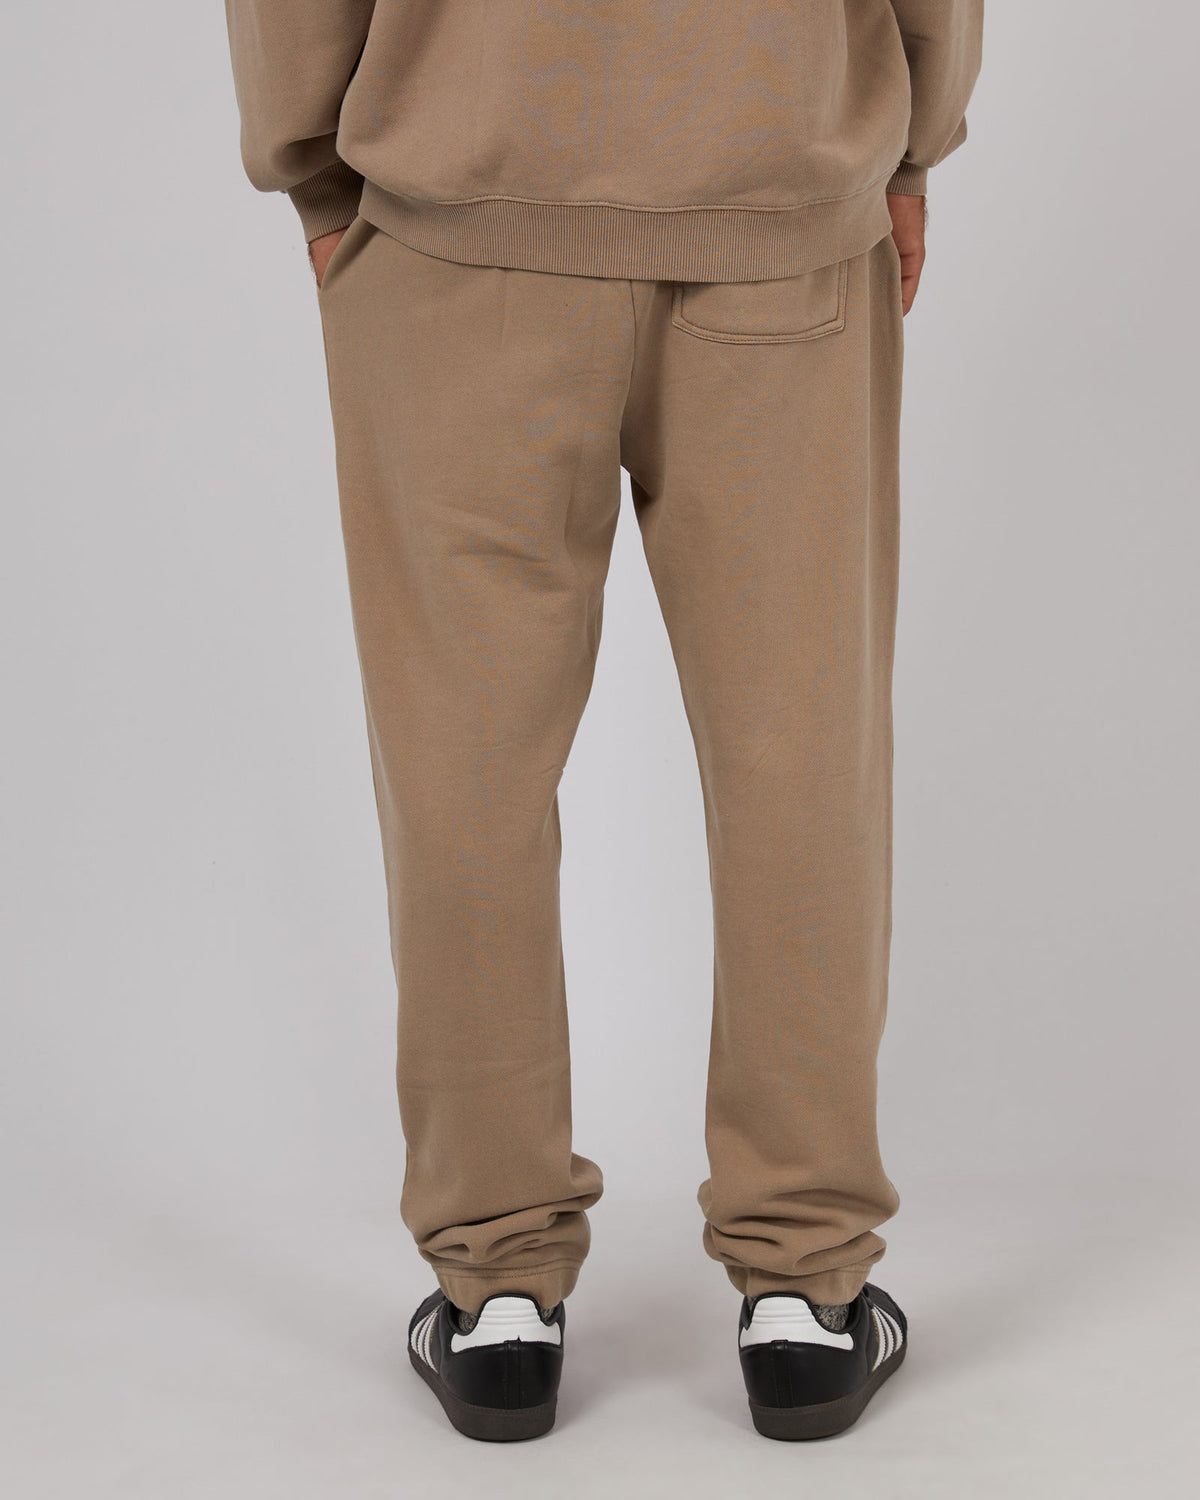 Silent Theory-Essential Theory Track Pant Tan-Edge Clothing